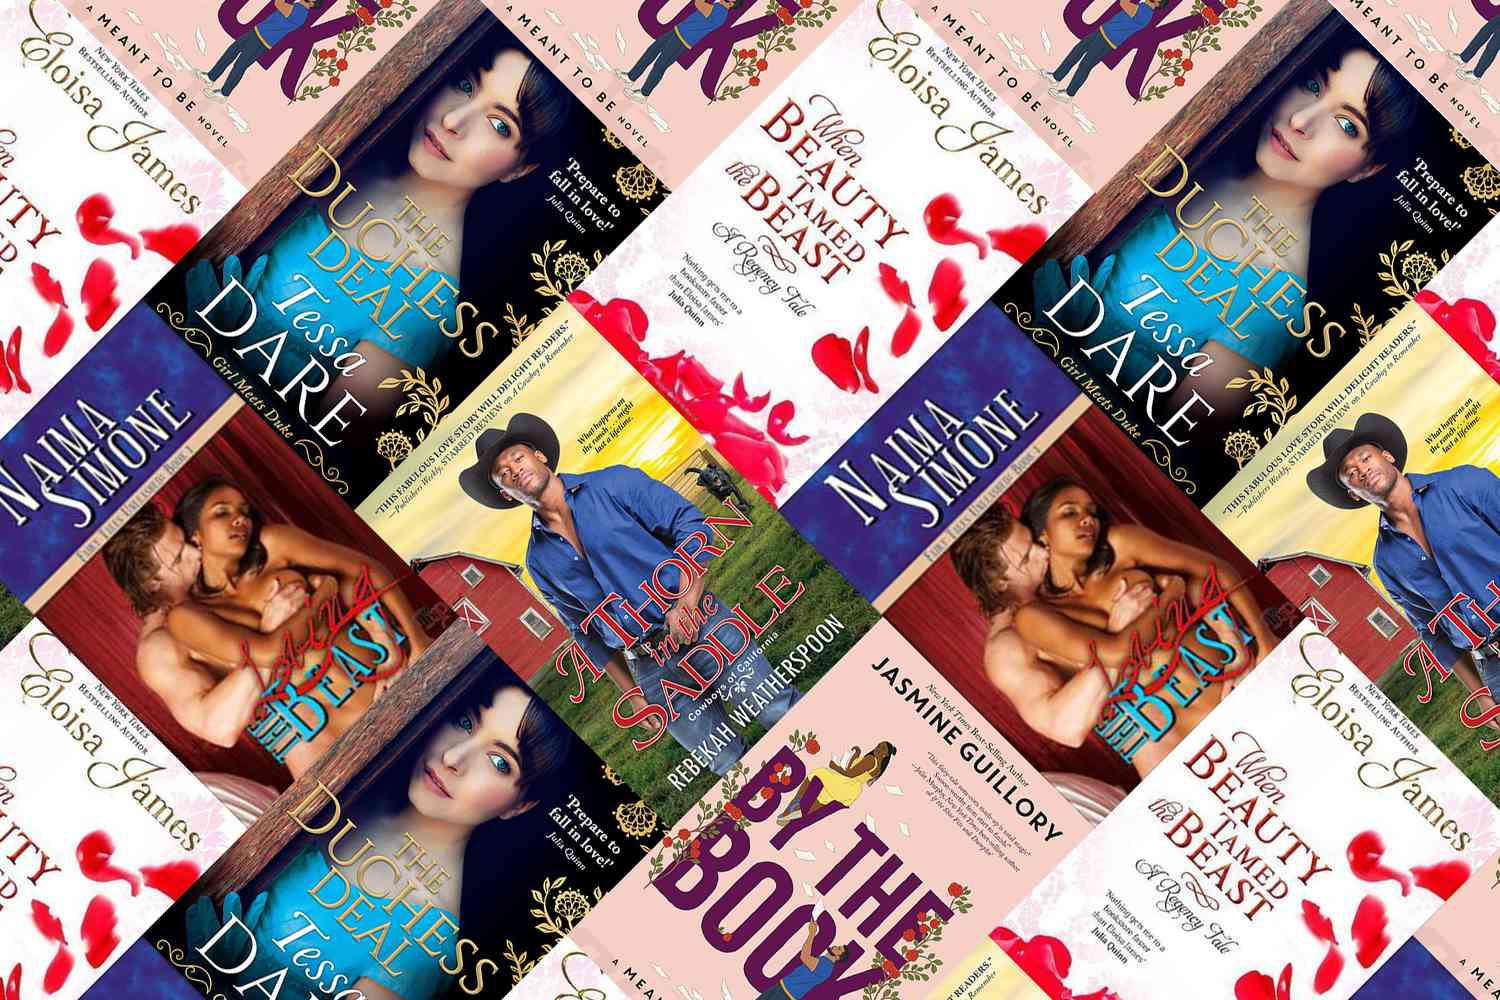 A Thorn in the Saddle by Rebekah Weatherspoon By the Book by Jasmine Guillory The Duchess Deal by Tessa Dare Loving the Beast by Naima Simone When Beauty Tamed the Beast by Eloisa James